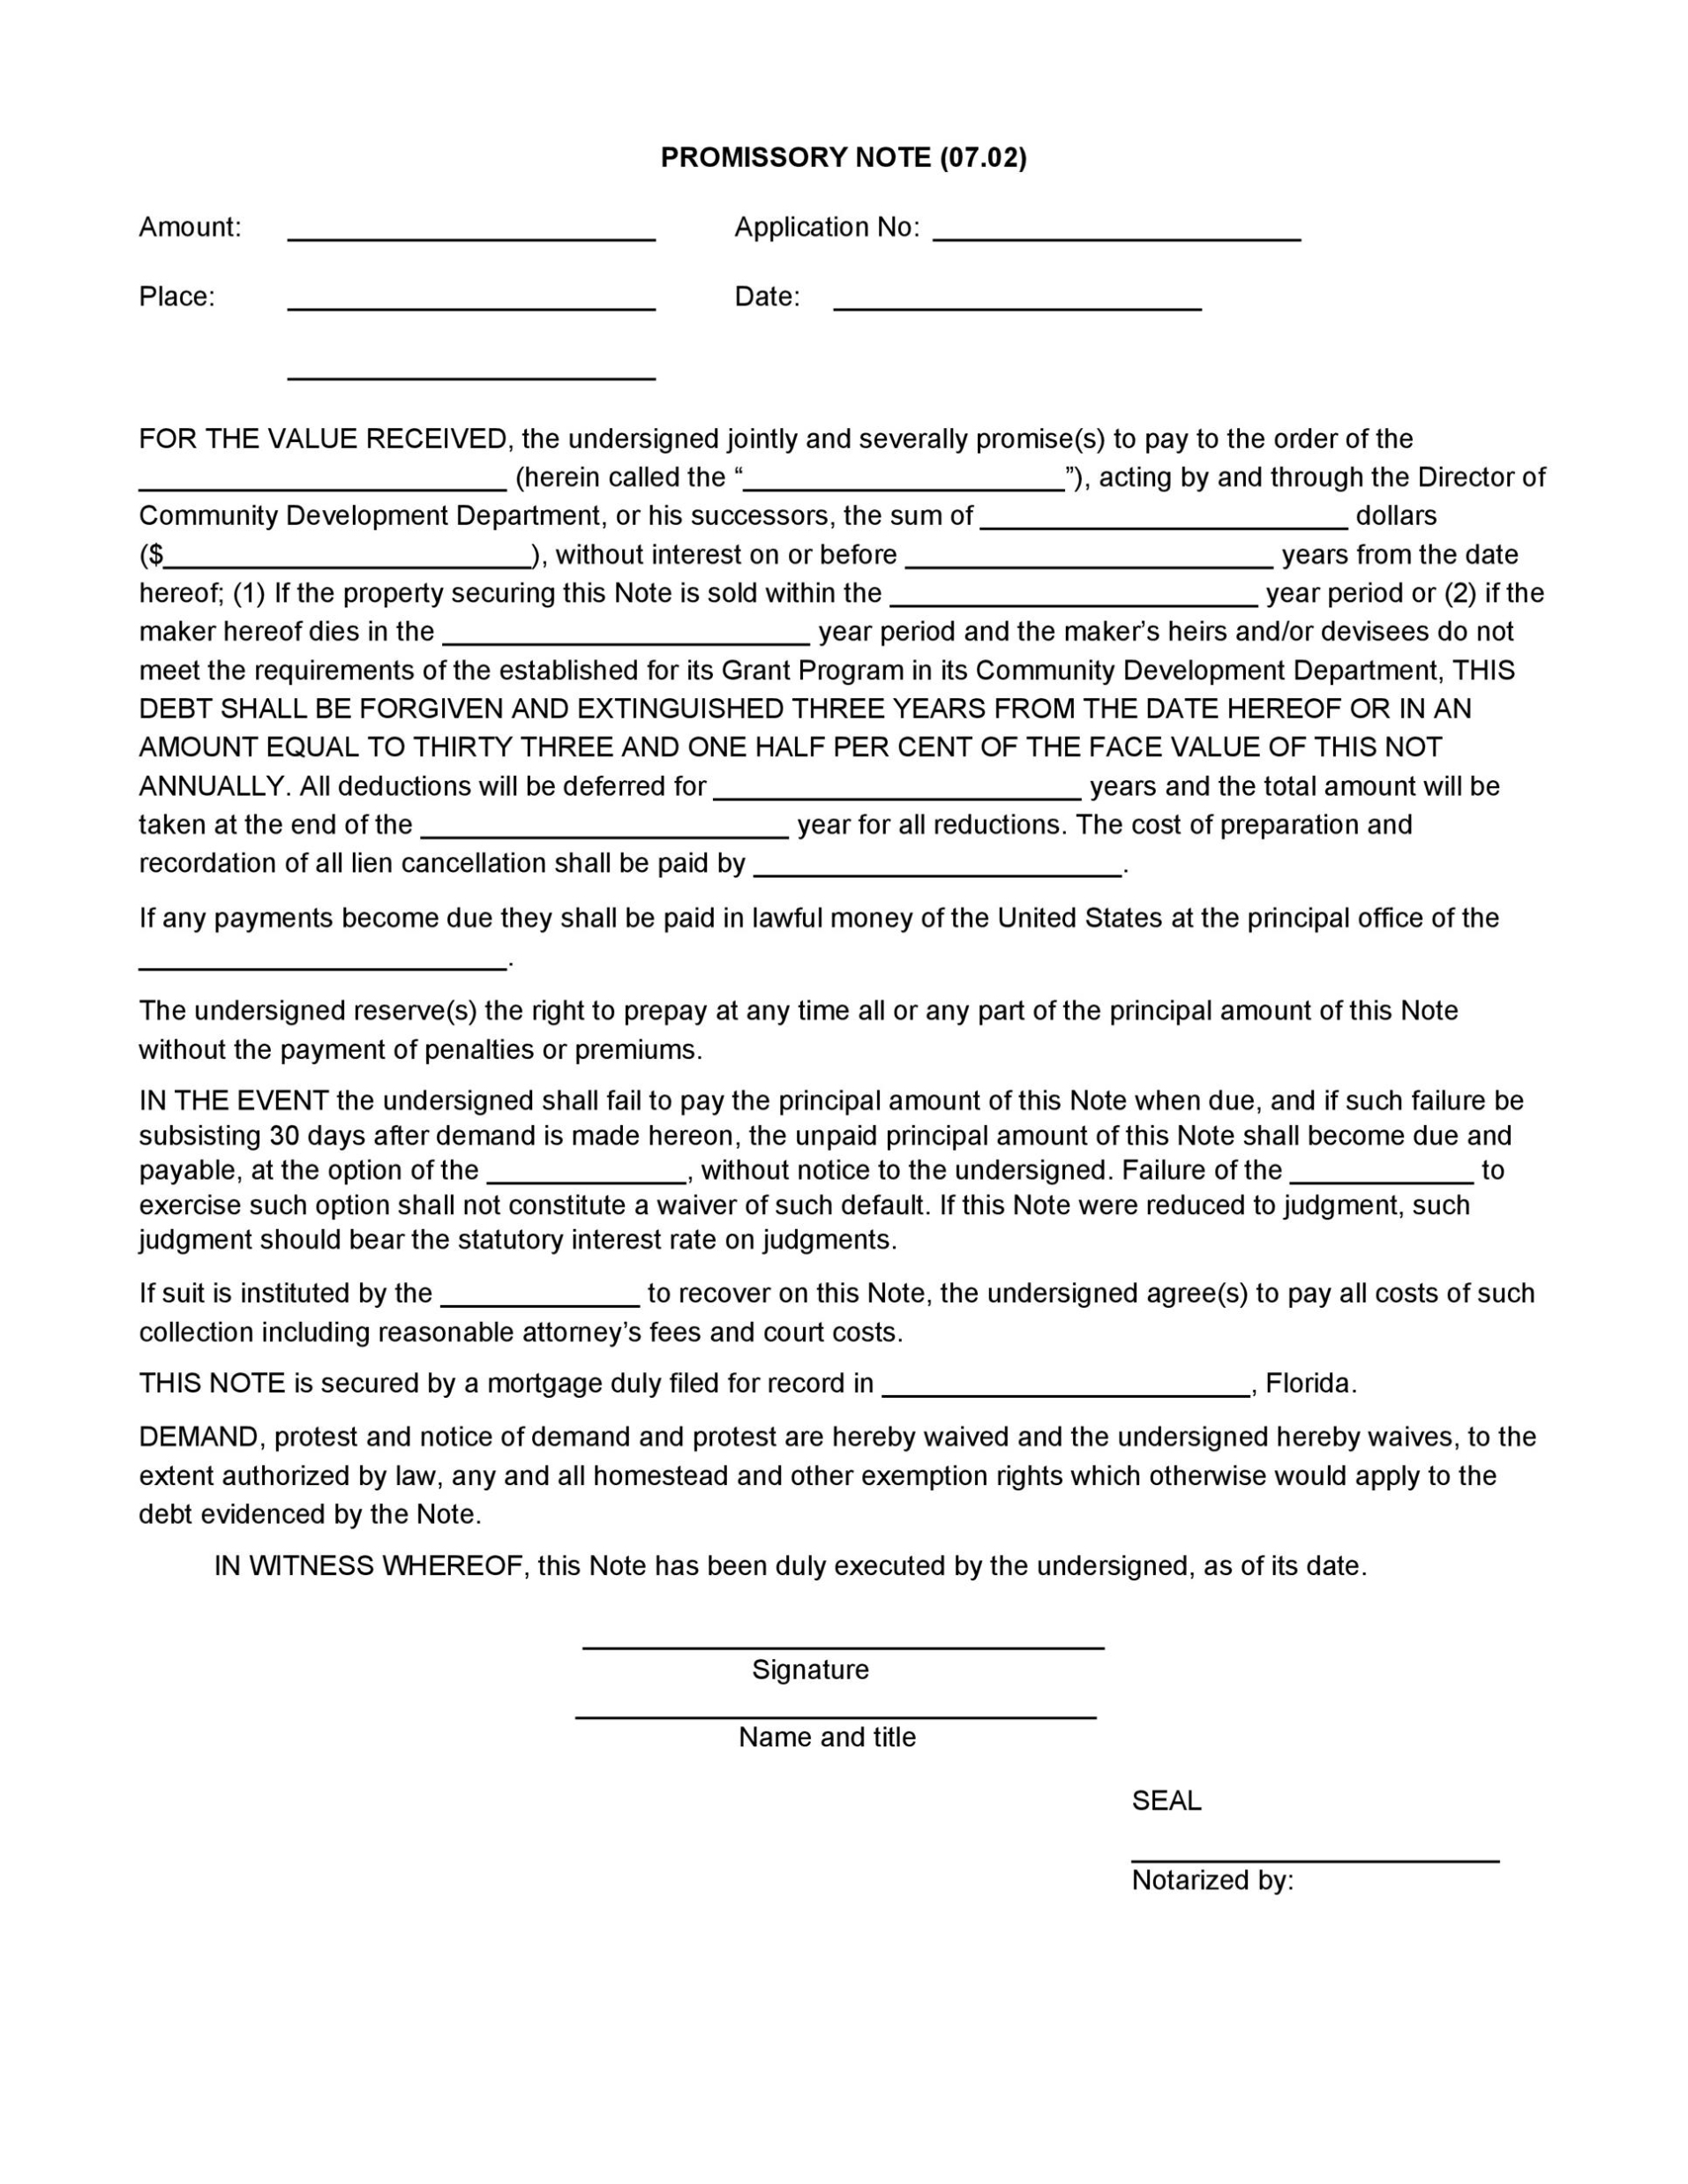 45 Free Promissory Note Templates & Forms [Word & Pdf] ᐅ Templatelab Inside Free Promissory Note Template For Personal Loan